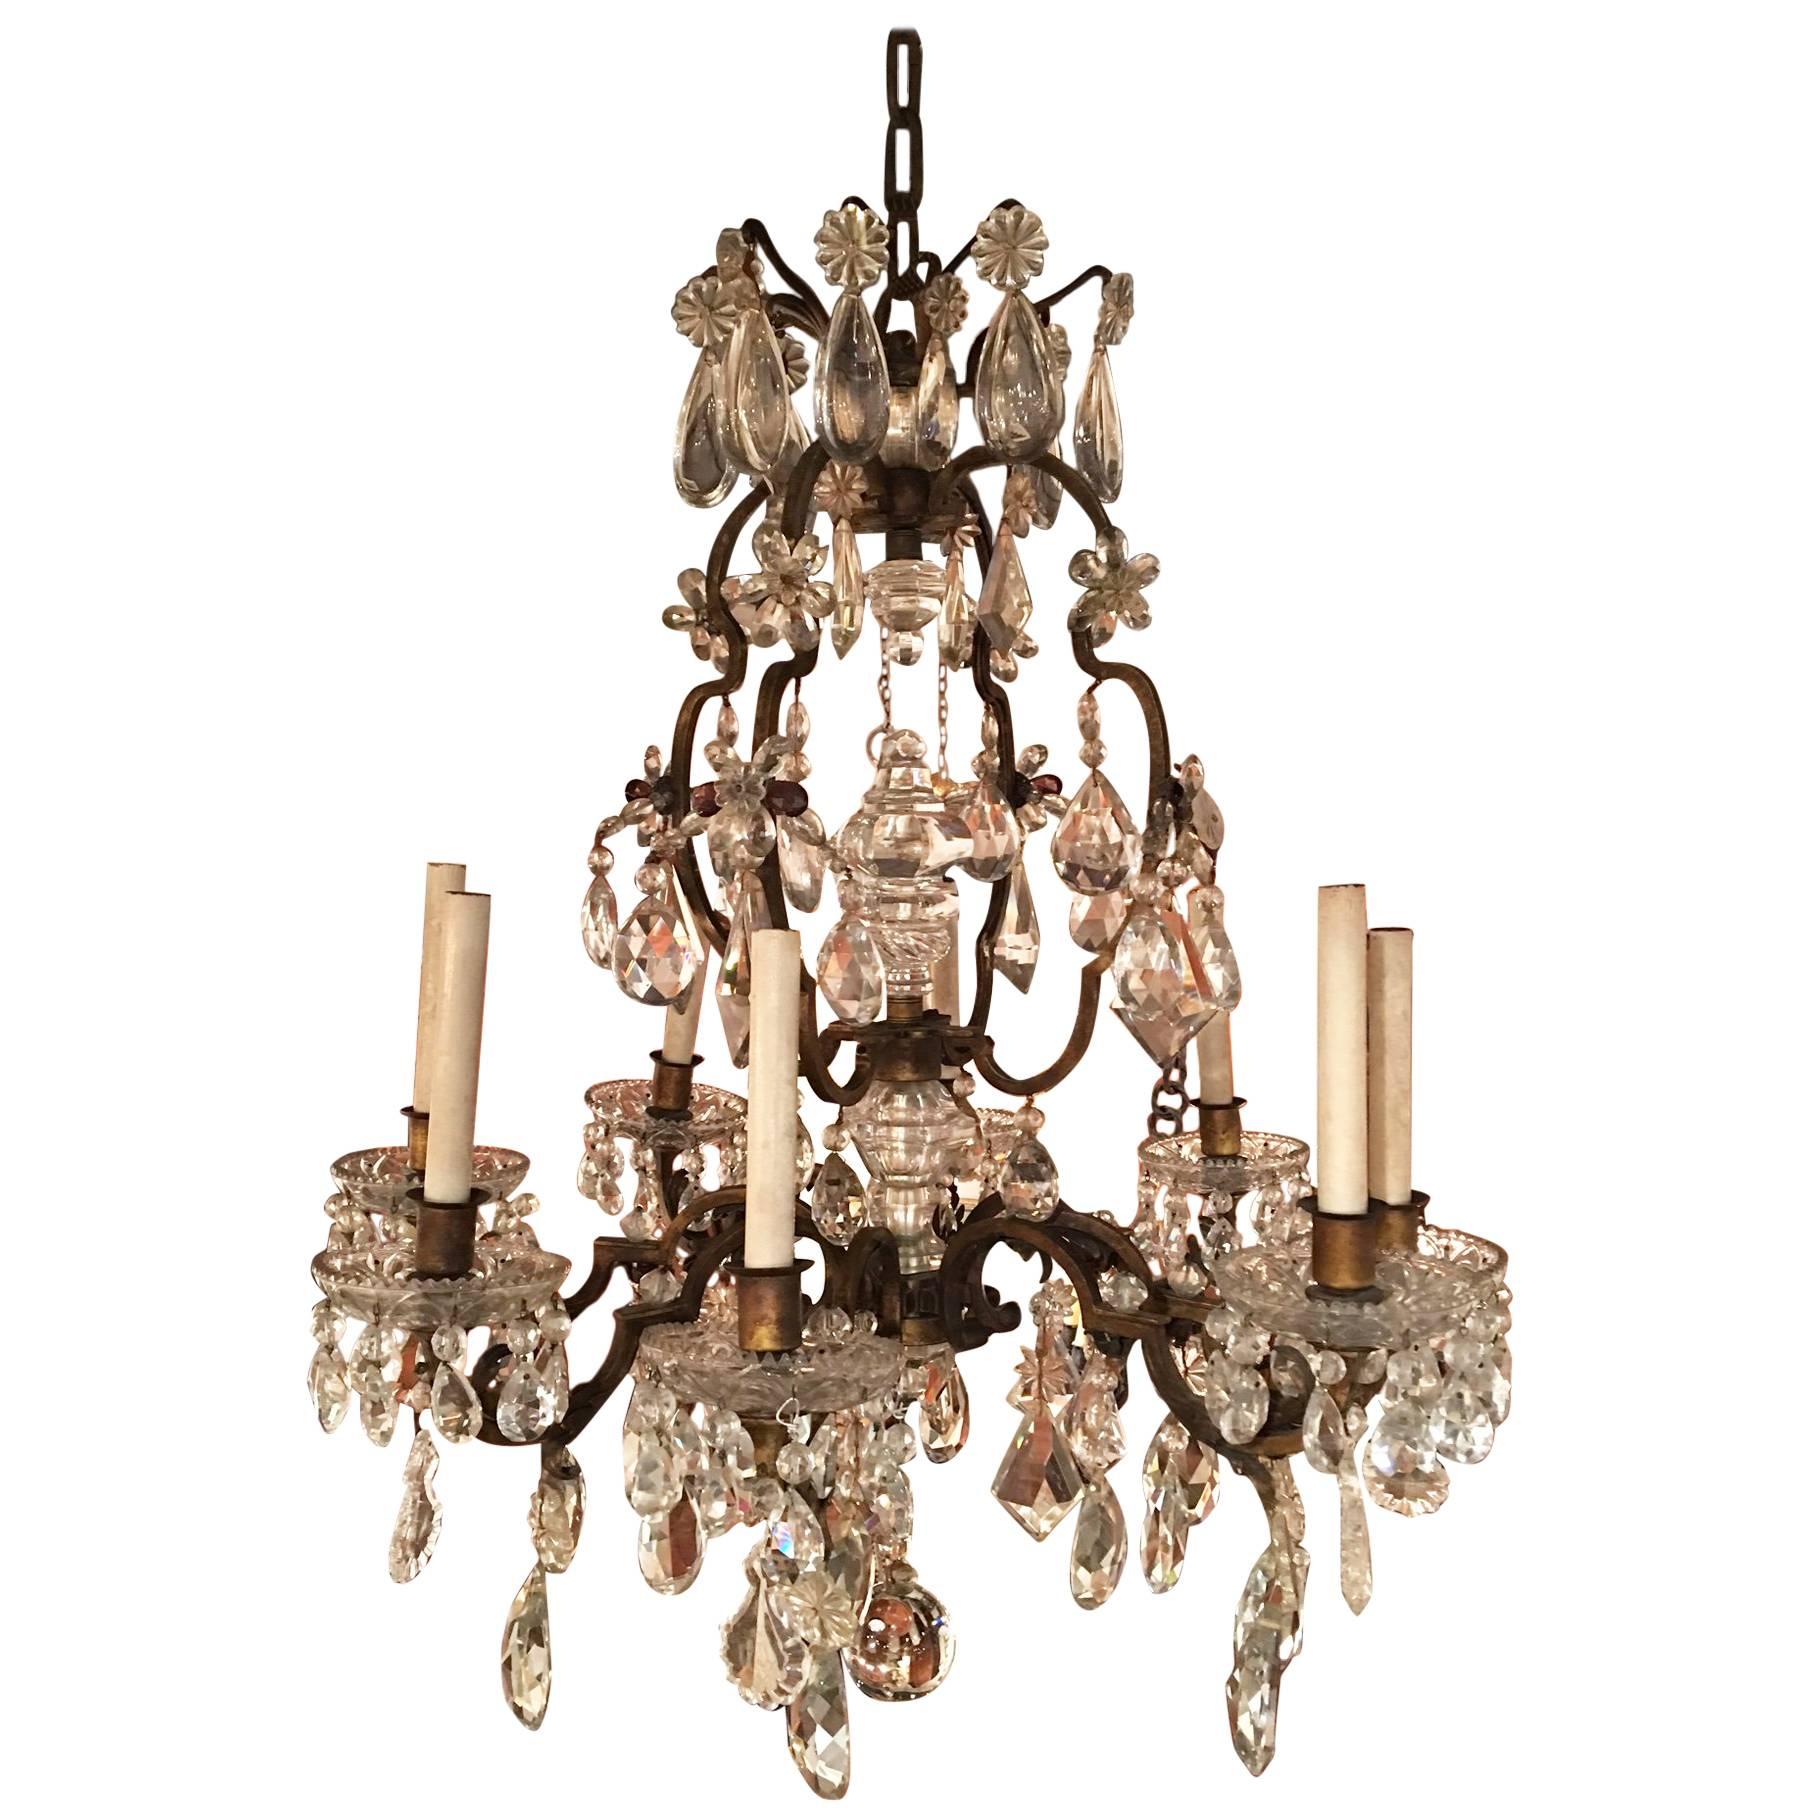 French Eight-Light Crystal Chandelier, 19th Century